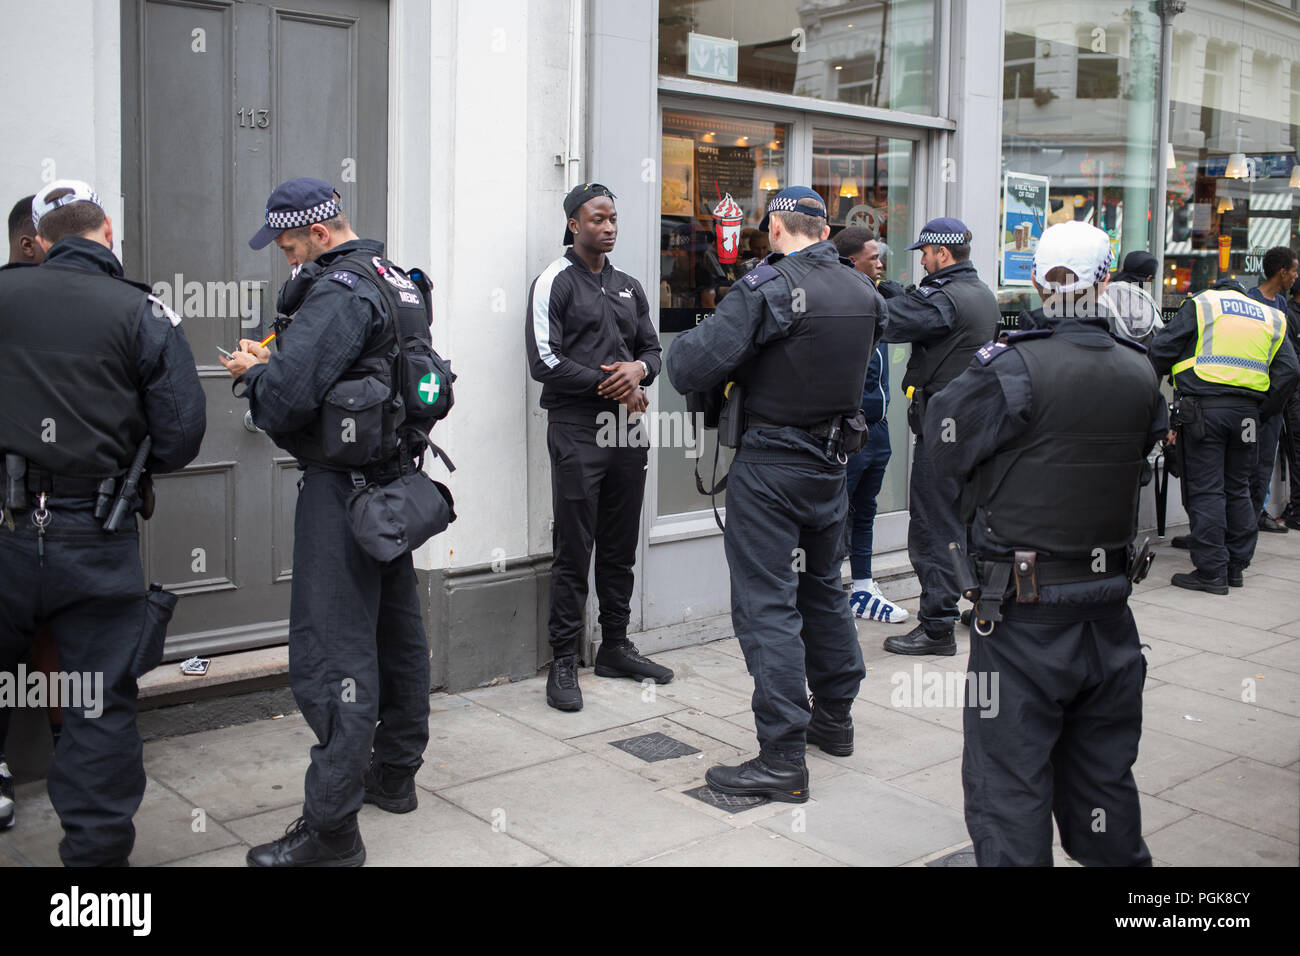 London UK 27th August 2018 Police were pictured carrying out stop-and-search at the Notting Hill Carnival after being handed extra powers in a bid they say to curb violent crime. Police stop and search young black men at the annual Notting Hill Carnival. For many victims of this experience it is a source of anger and frustration as they feel targetted due to their skin colour.  Credit: Thabo Jaiyesimi/Alamy Live News Stock Photo